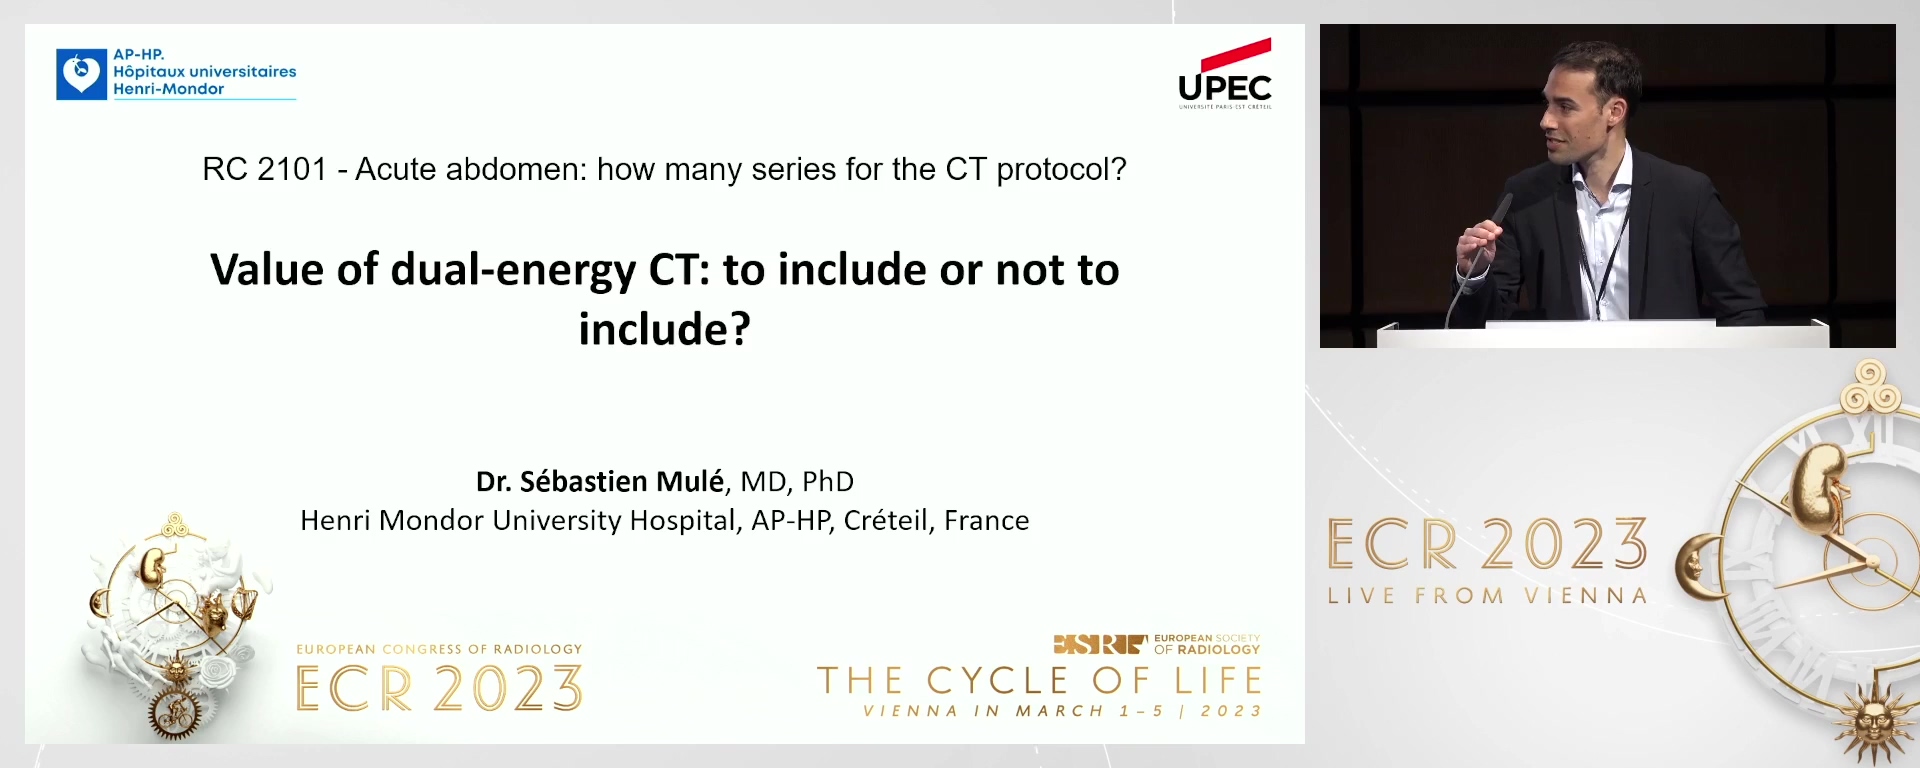 Value of dual-energy CT: to include or not to include?